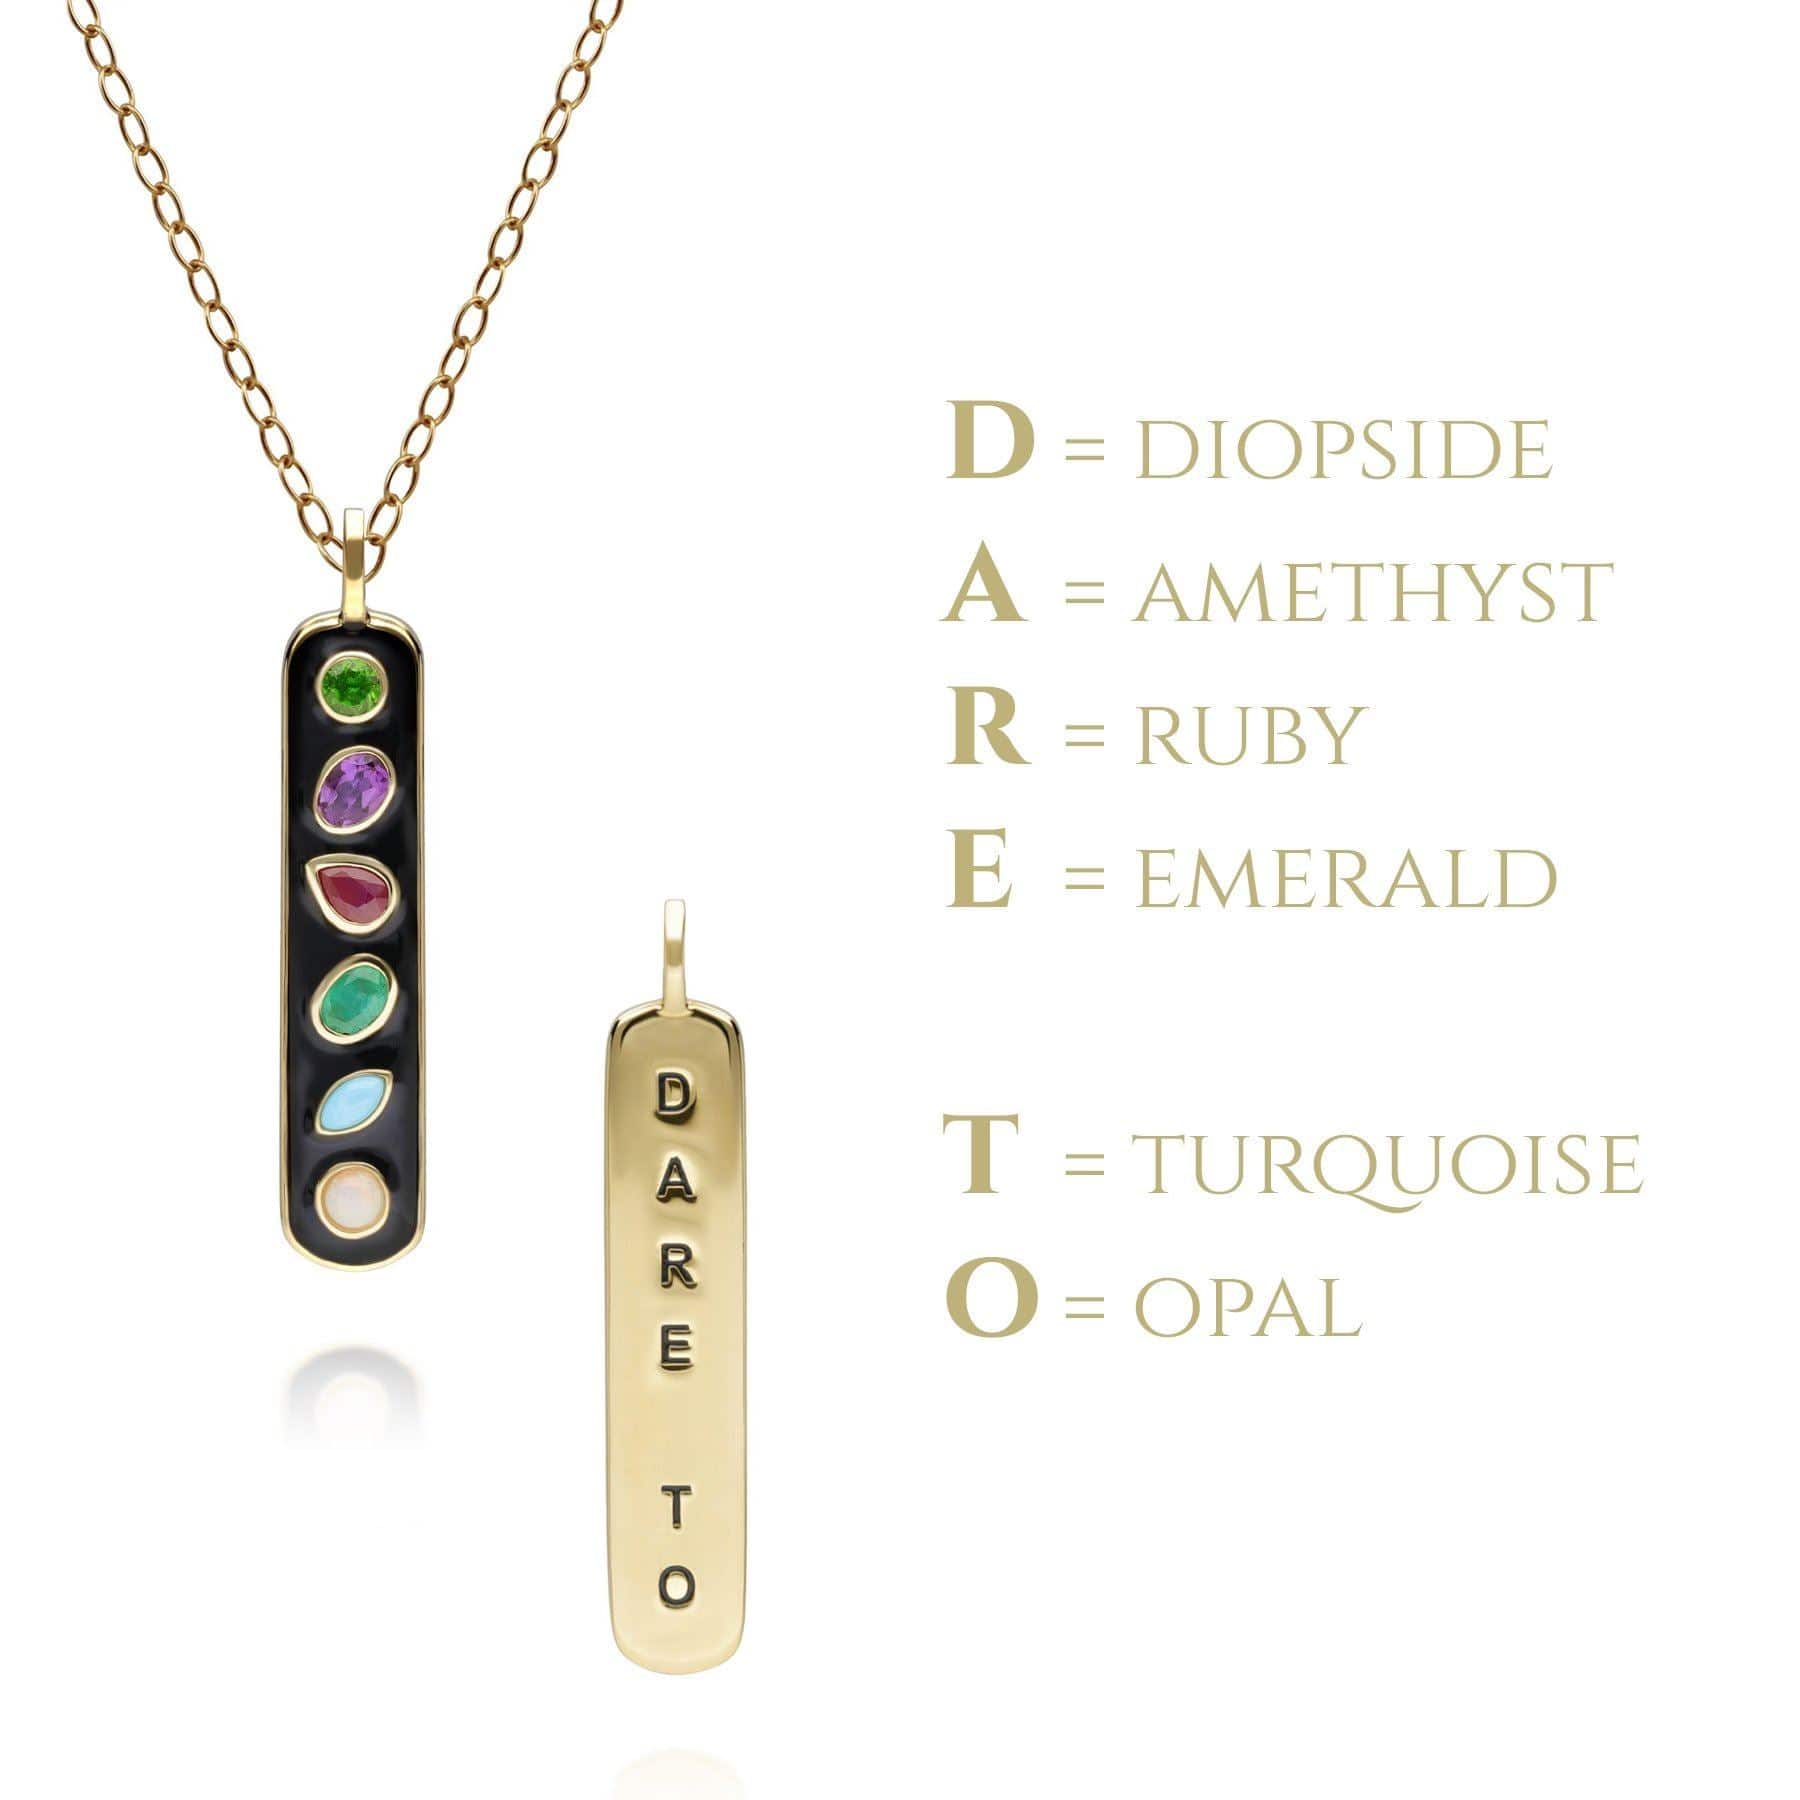 253P312201925 Coded Whispers Black Enamel 'Dare To' Acrostic Gemstone Pendant Necklace in Sterling Silver 4